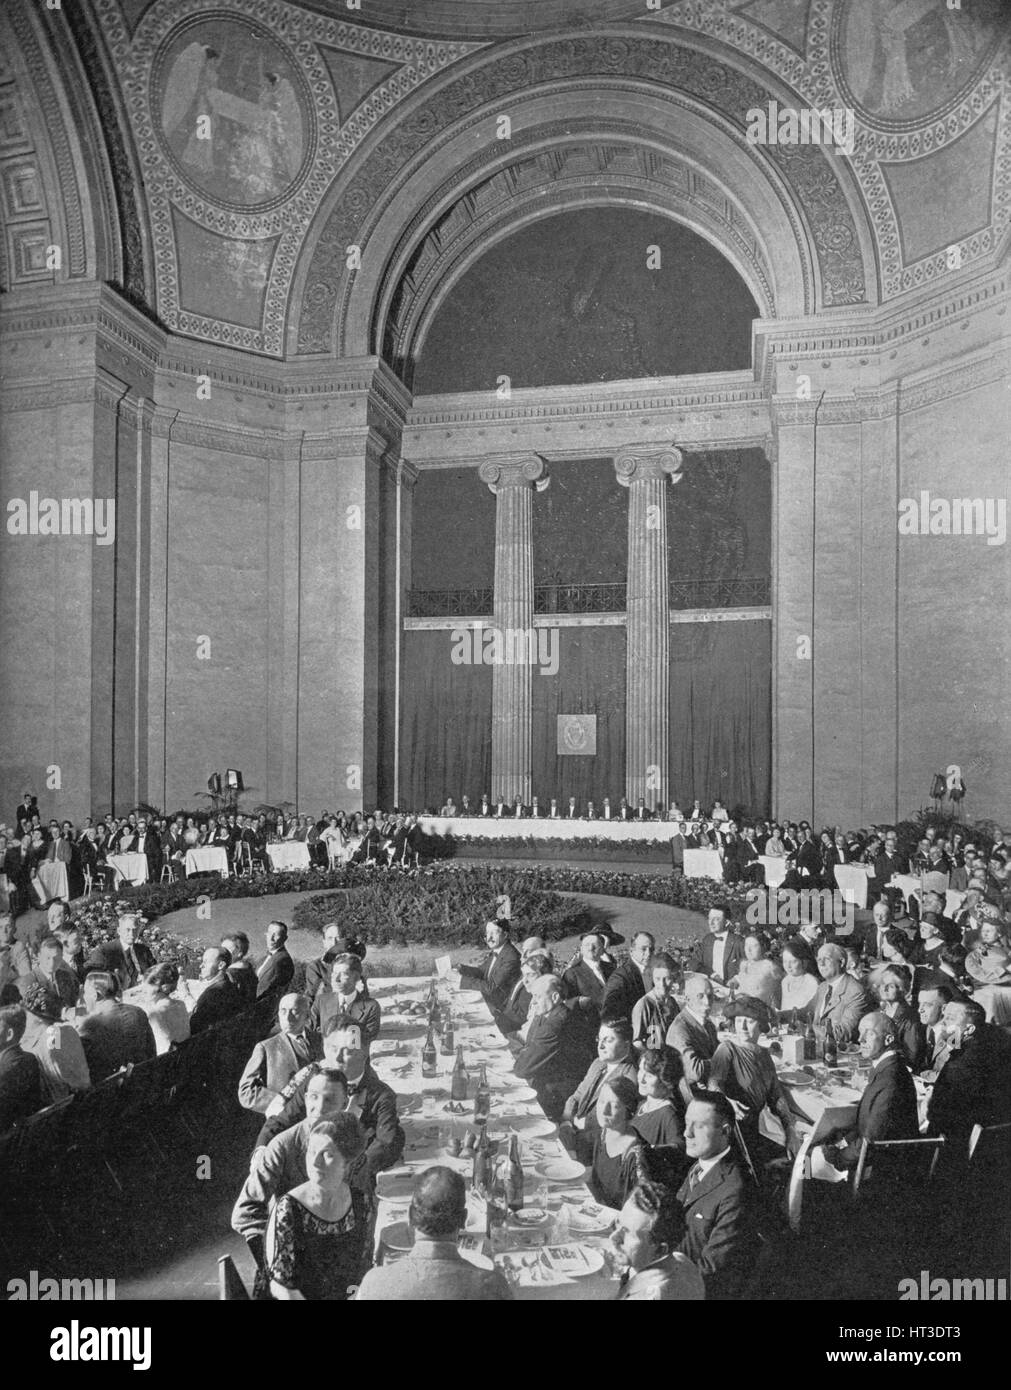 American Institute of Architects banquet, Old Fine Arts Building, Chicago, Illinois, 9 June 1922. Artist: Unknown. Stock Photo